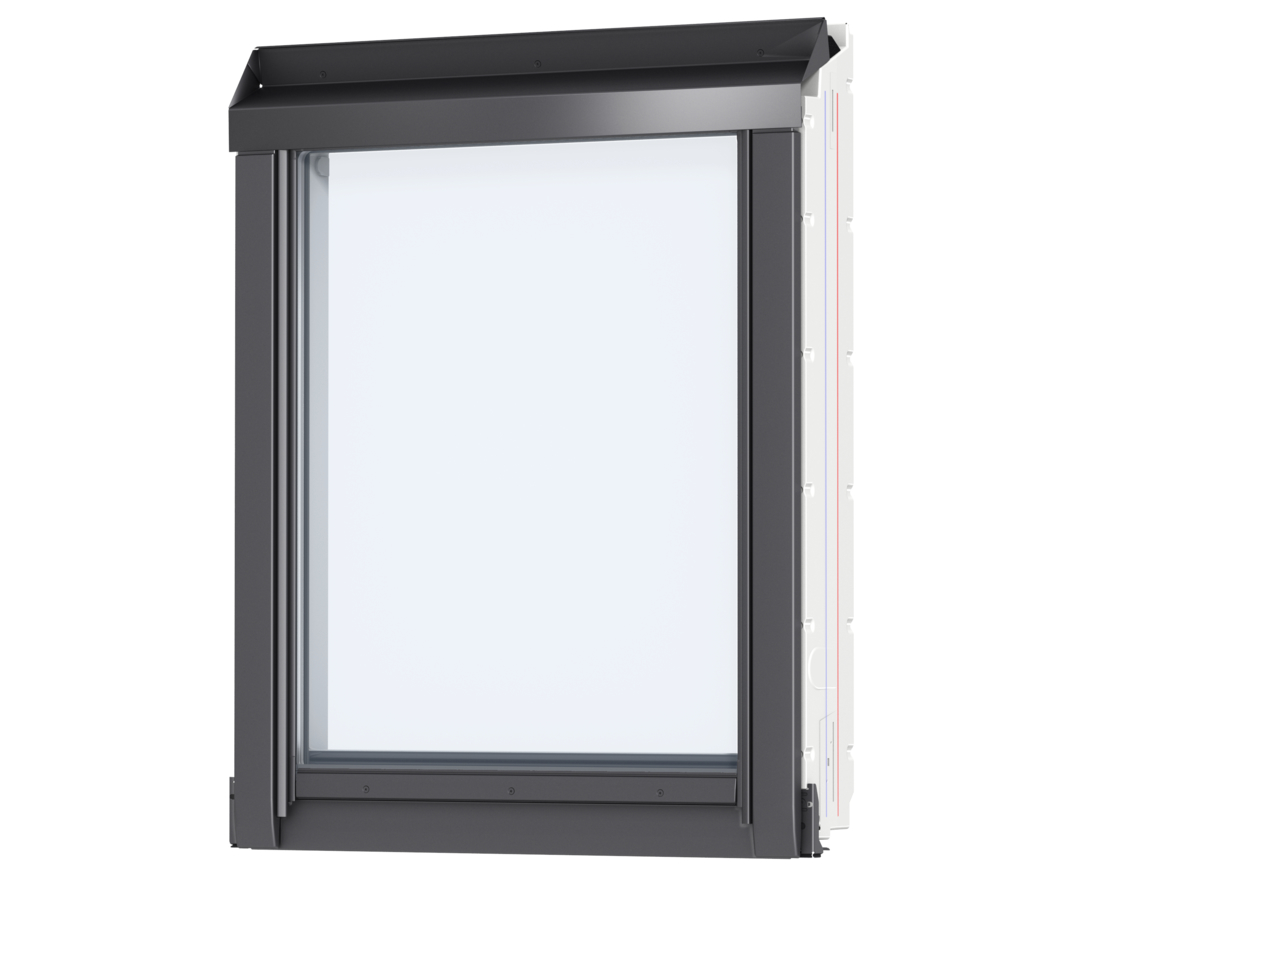 Possession Seaside strategy PVC Pitched Roof Windows - Roof Window Outlet